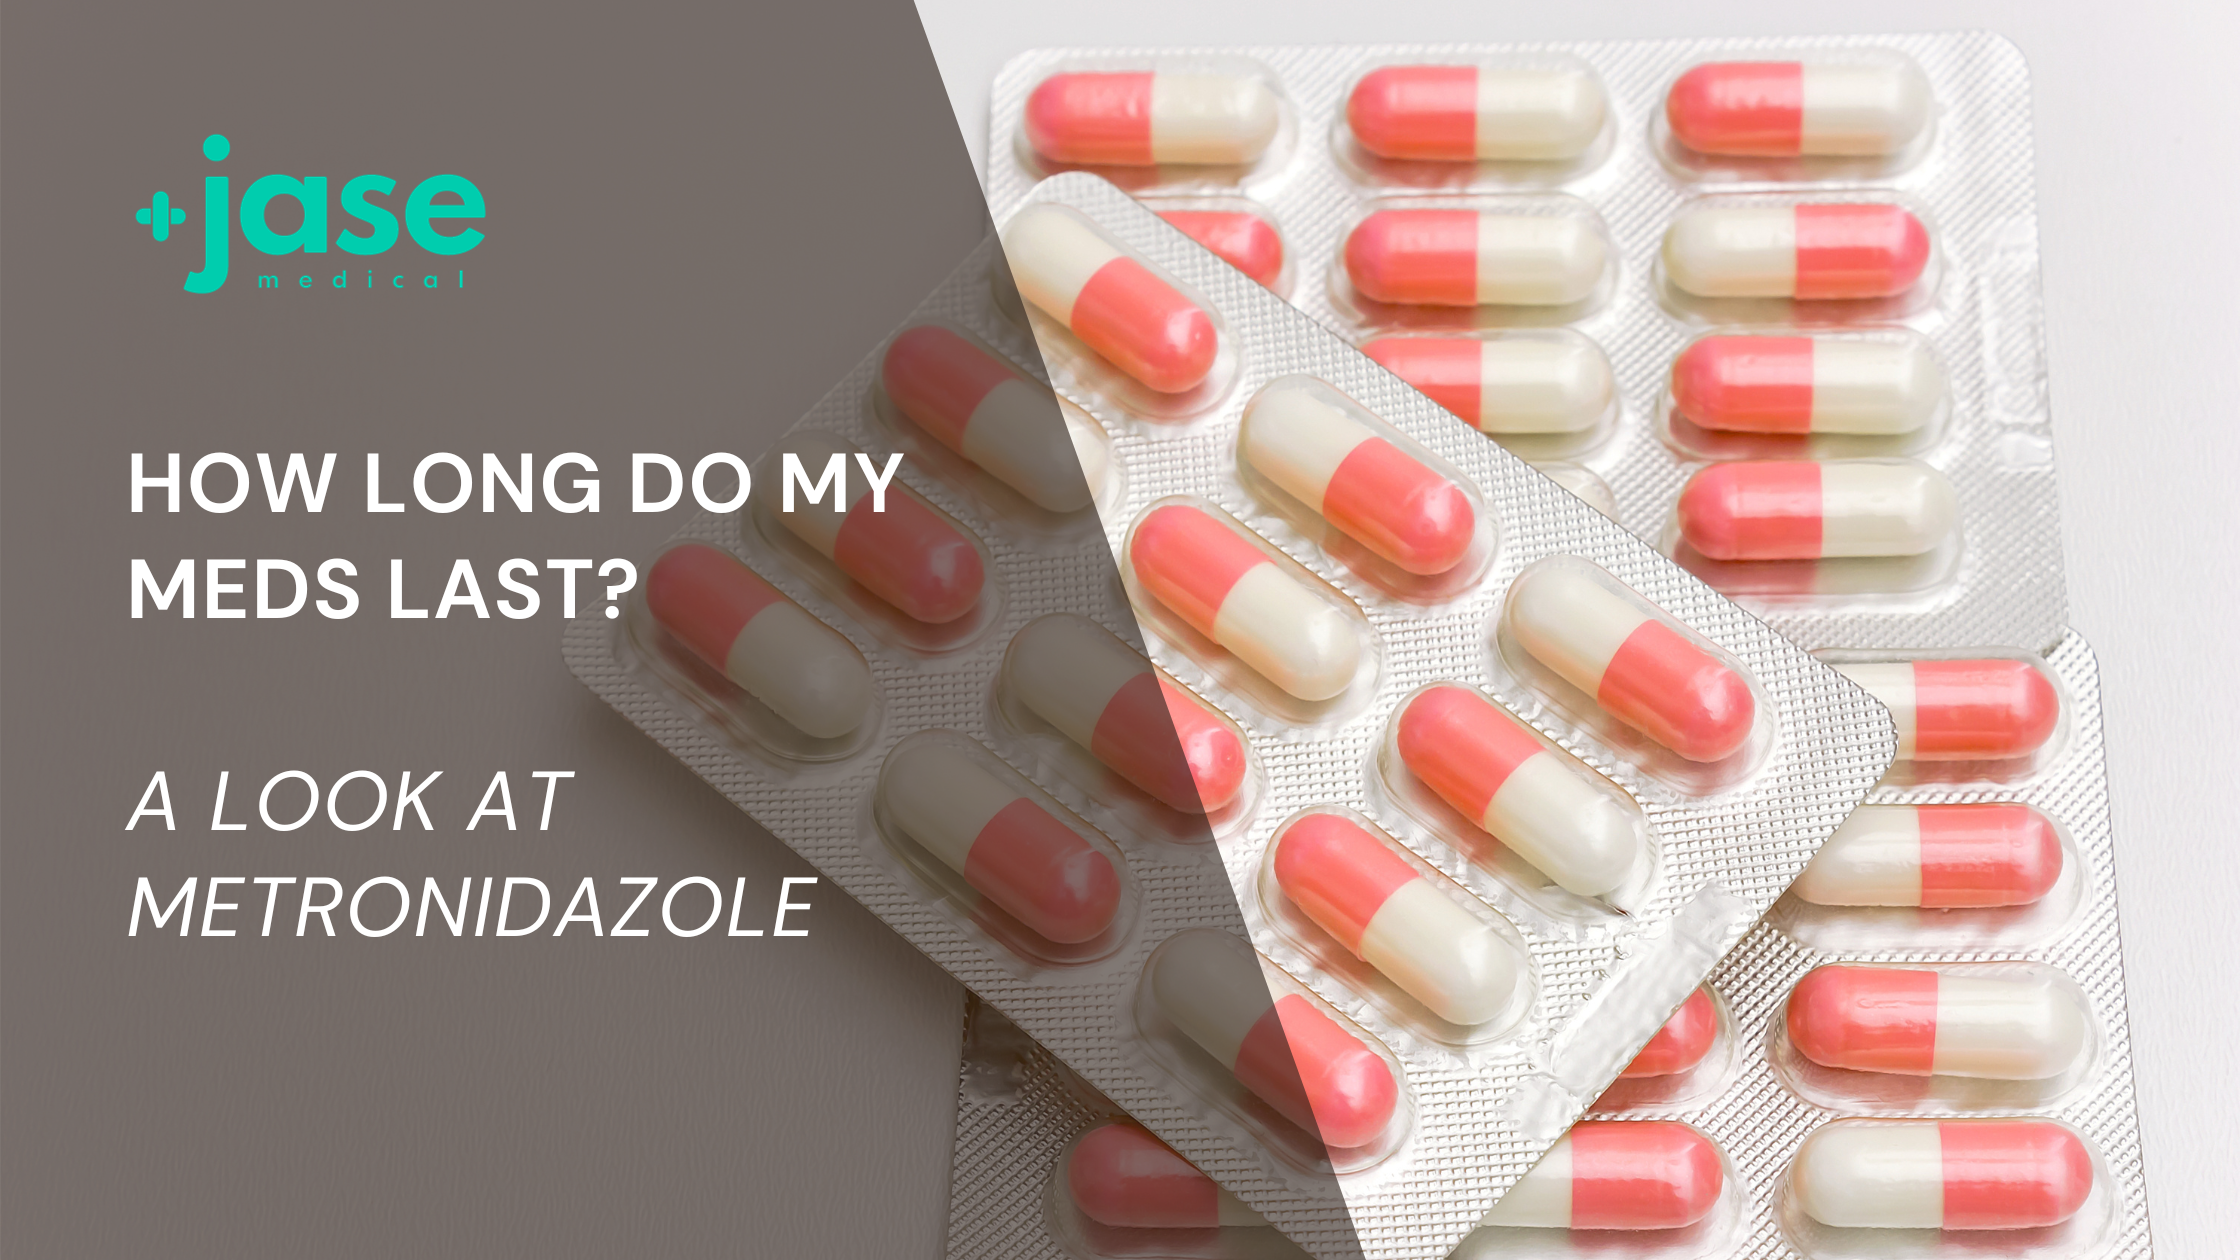 How Long do My Meds Last? A Look at Metronidazole